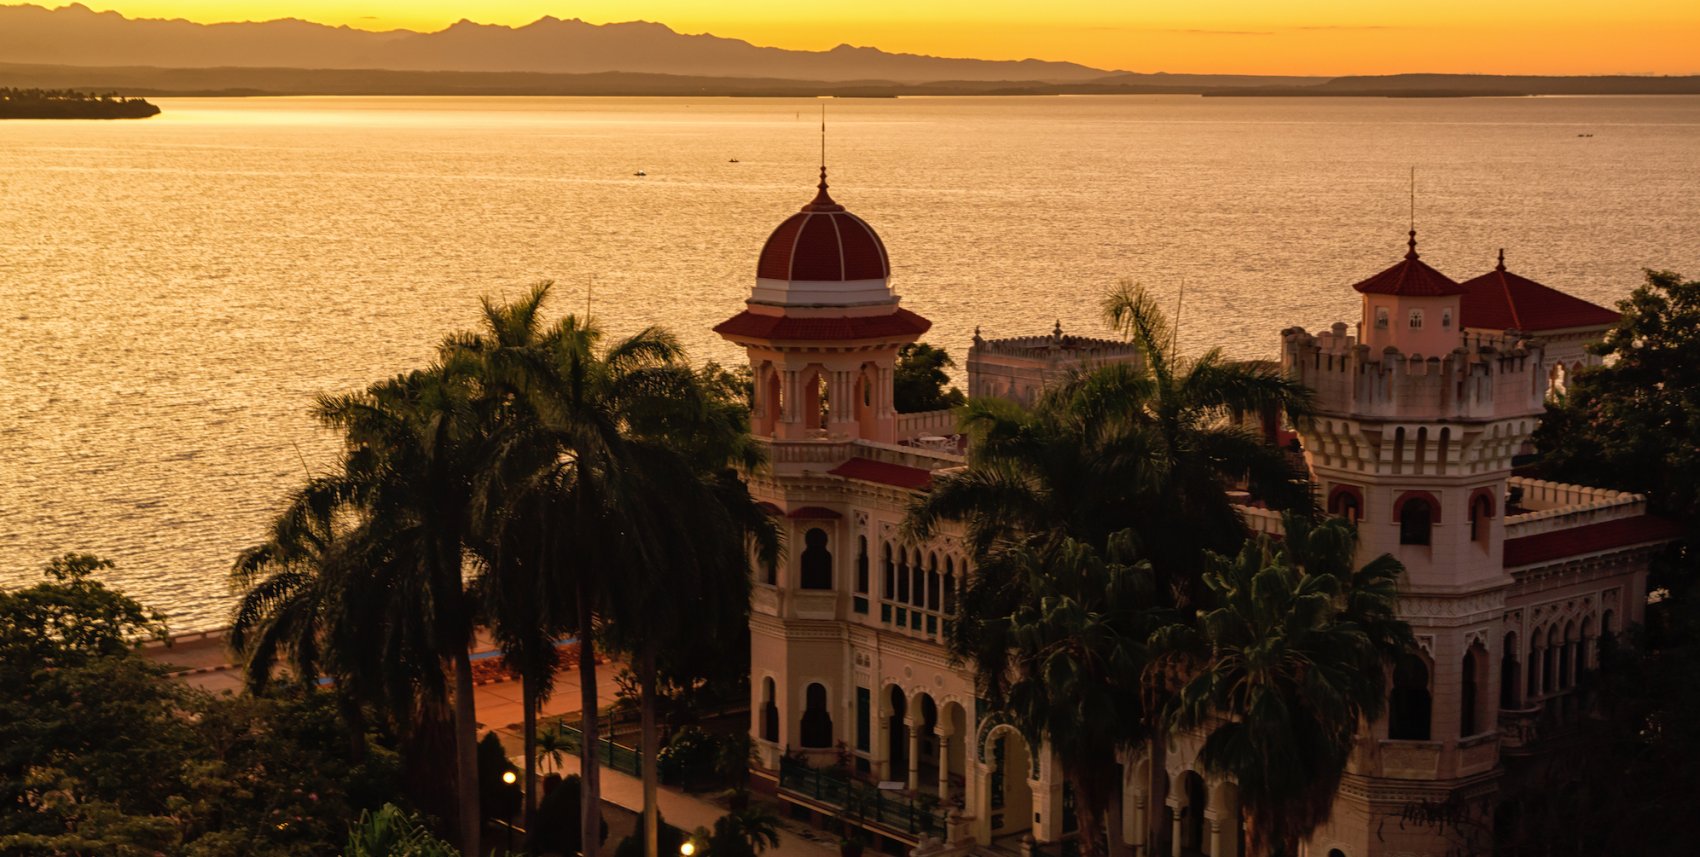 View of Cienfuegos along the water at sunset